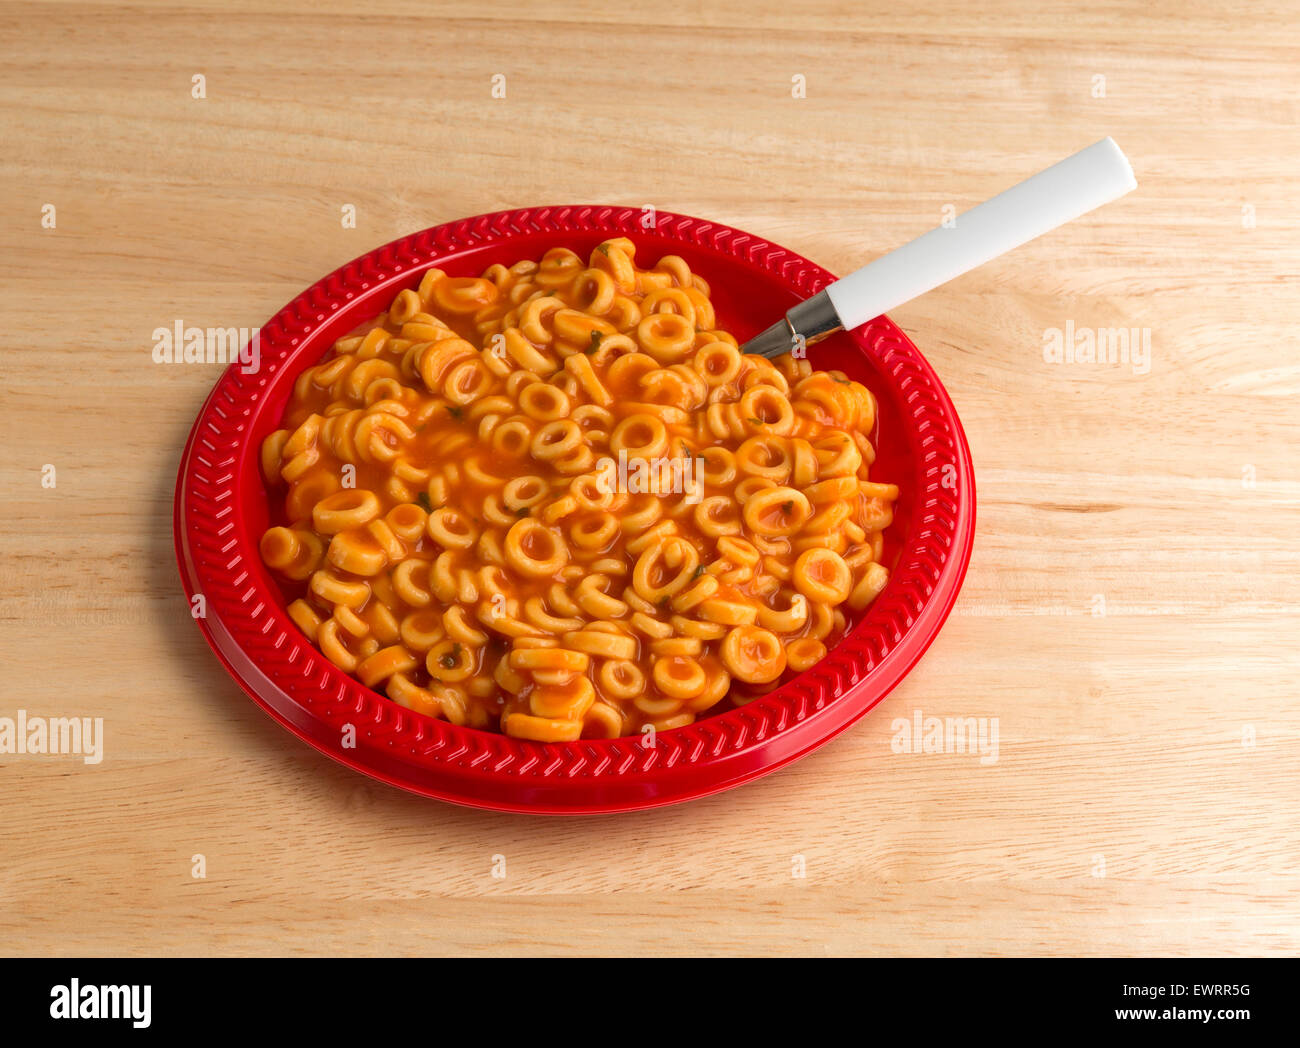 Side view of cooked canned round spaghetti pasta in tomato sauce on a red plate with a spoon illuminated by natural light. Stock Photo